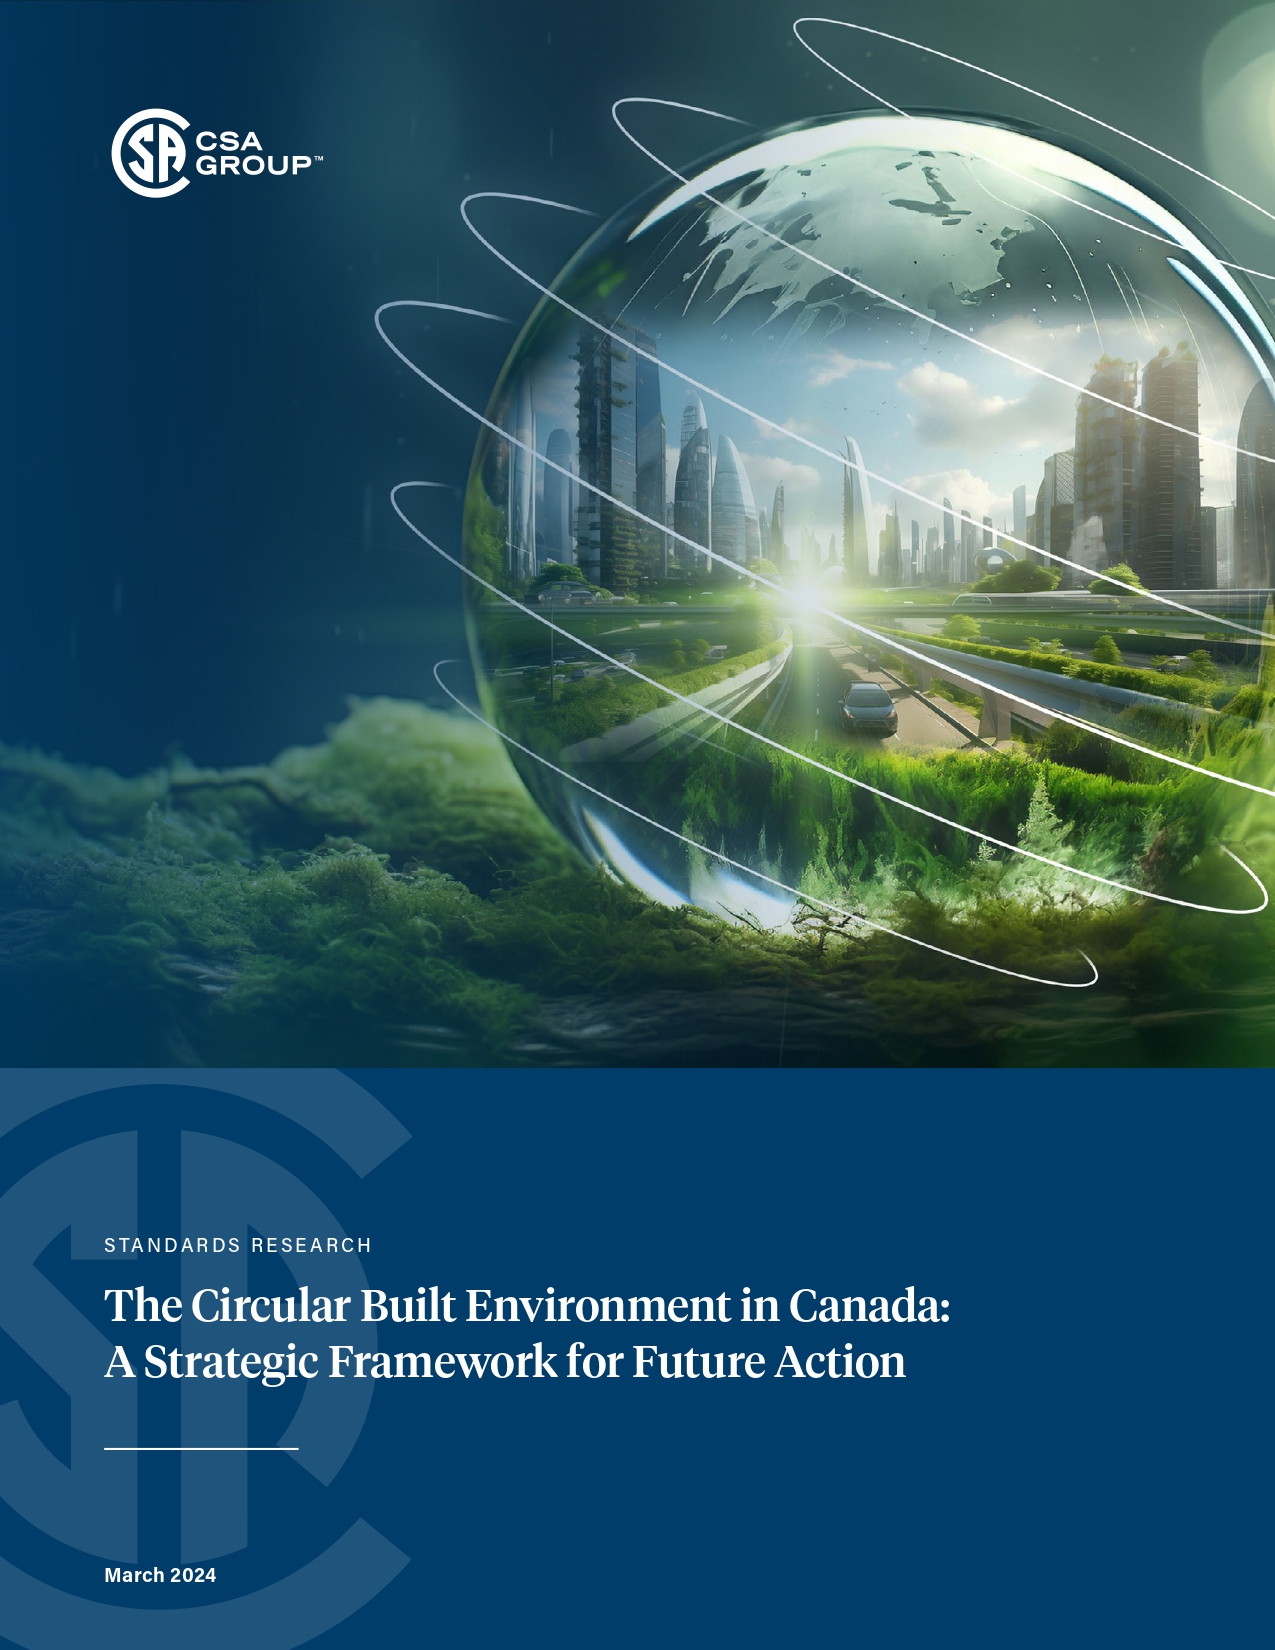 The Circular Built Environment in Canada_A Strategic Framework for Future Action